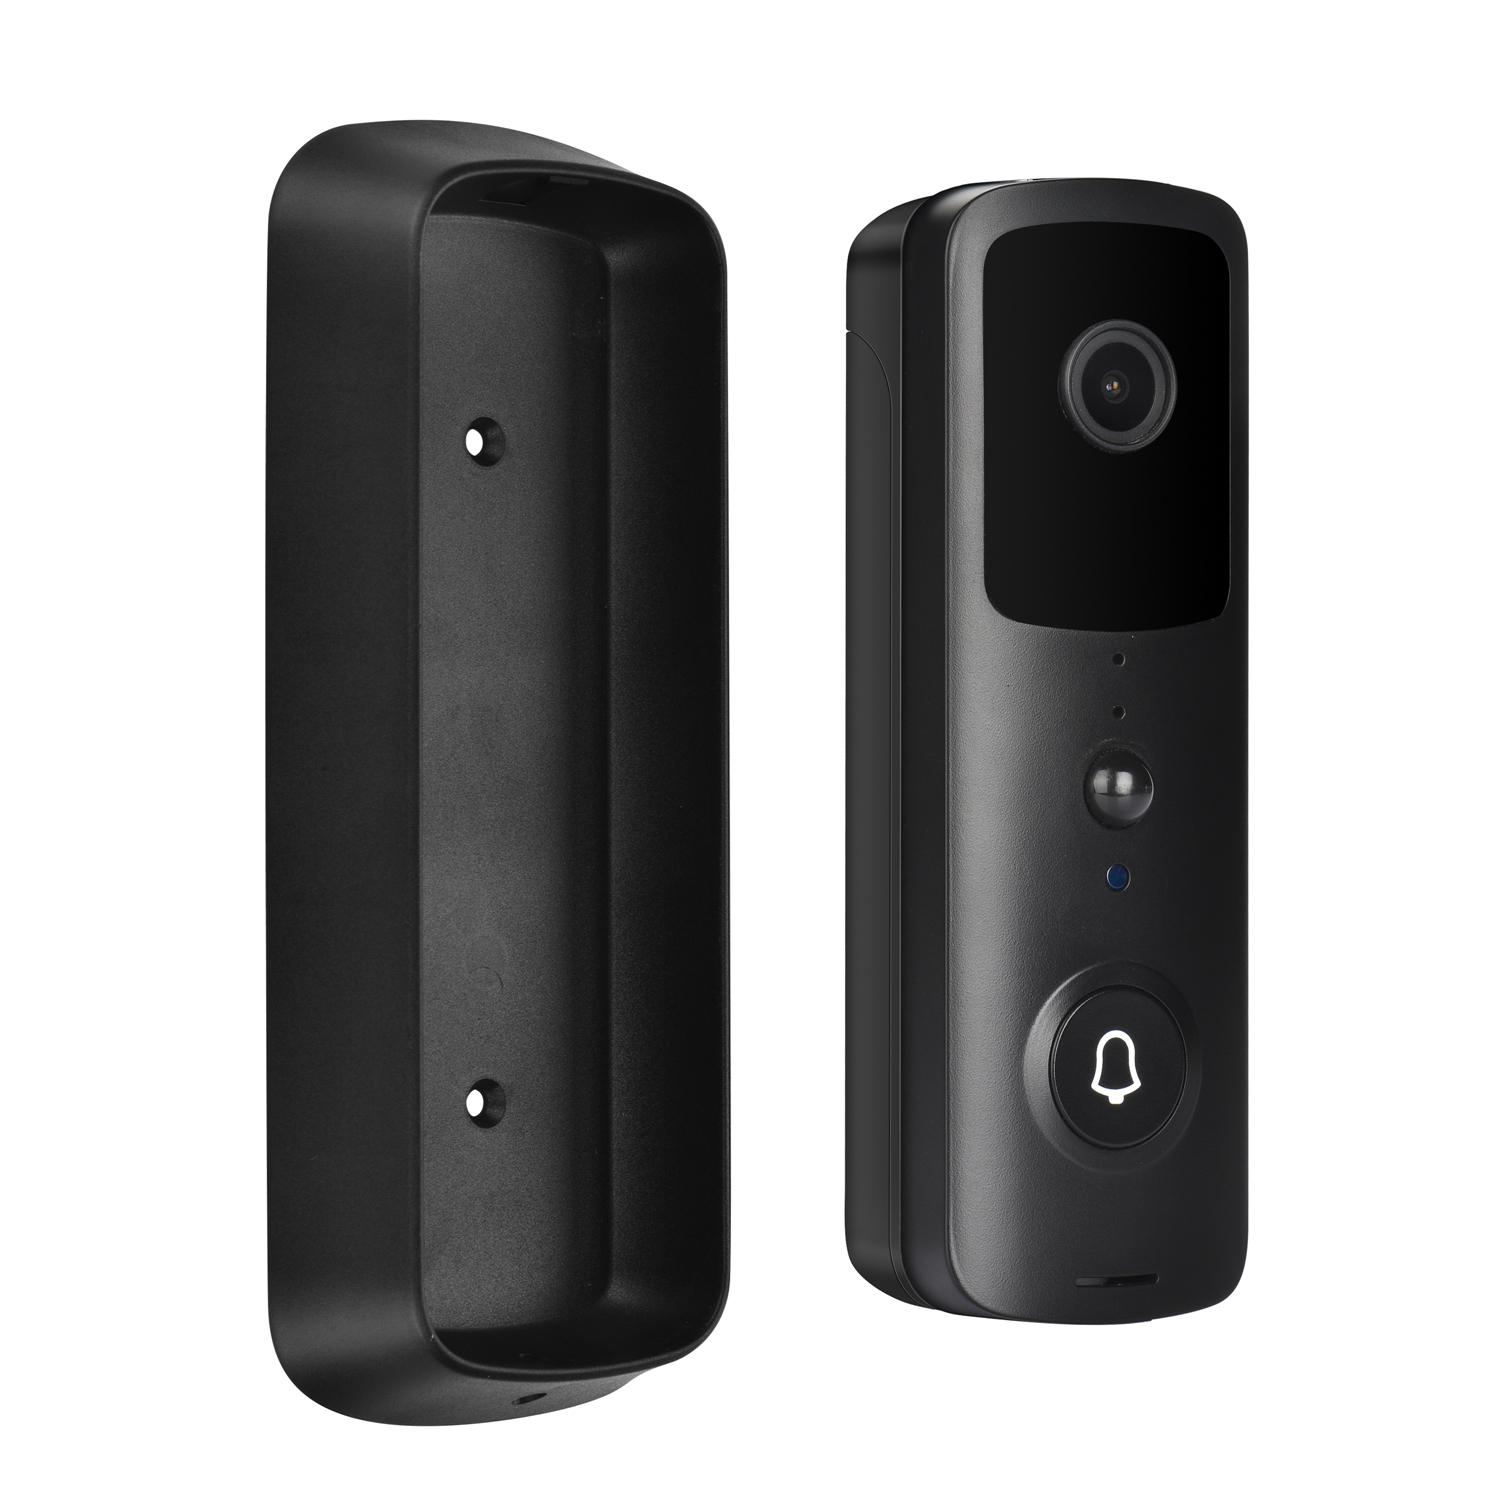 Hot Sale V30 1080P Wifi Video Doorbell Visual Intercom Camera With Chime Night Vision PIR Motion Detection for Android iOS APP